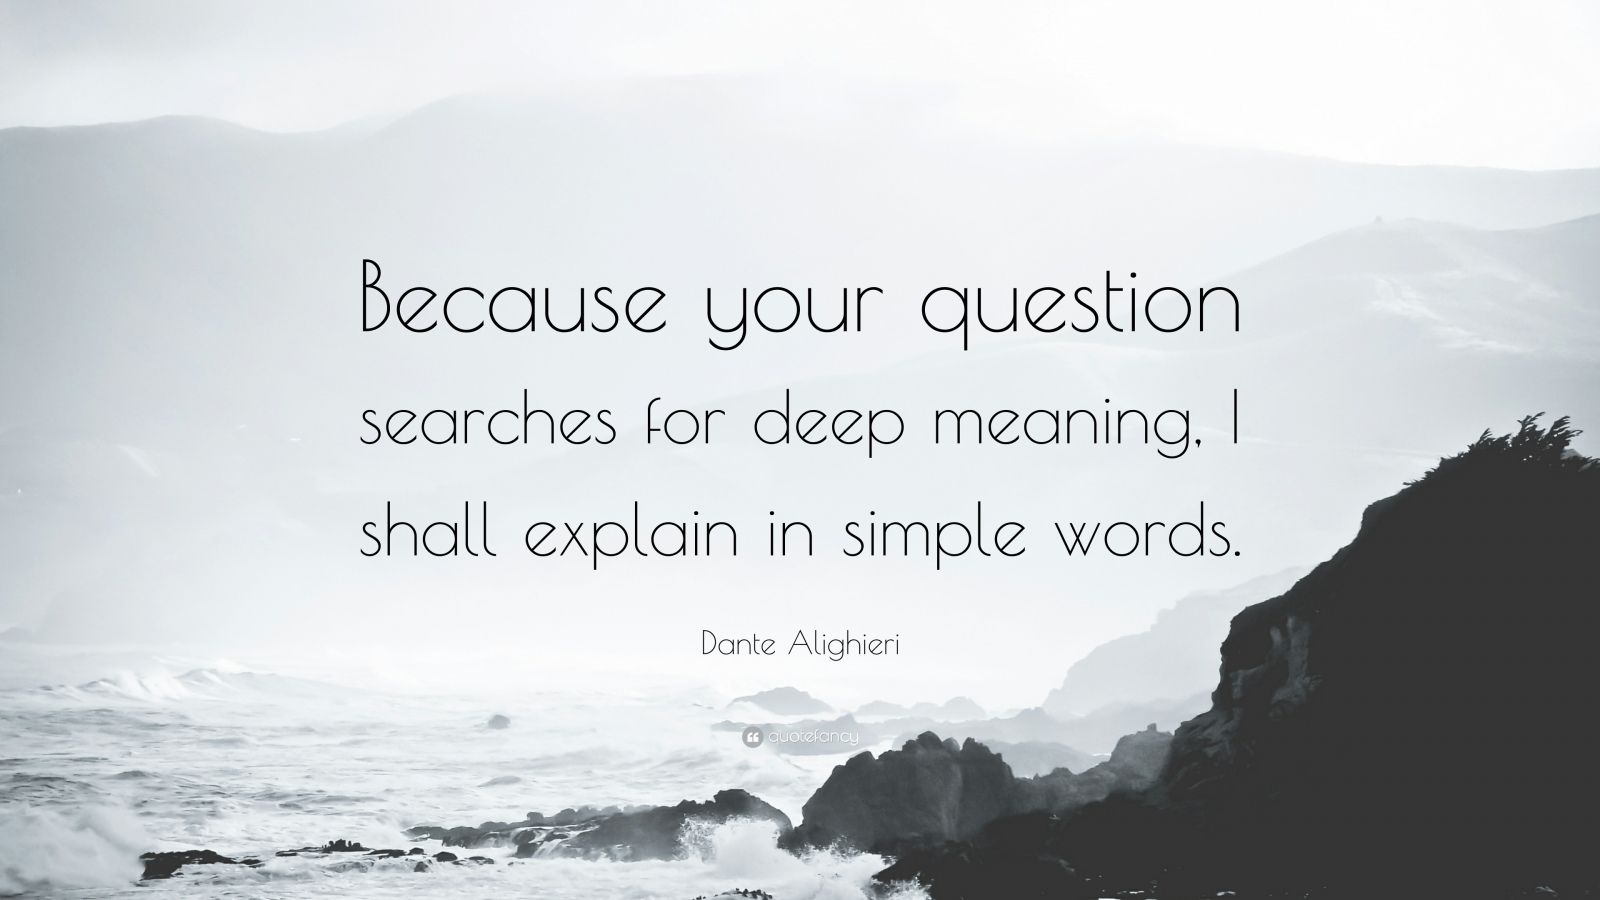 Dante Alighieri Quote: “Because your question searches for deep meaning, I  shall explain in simple words.”